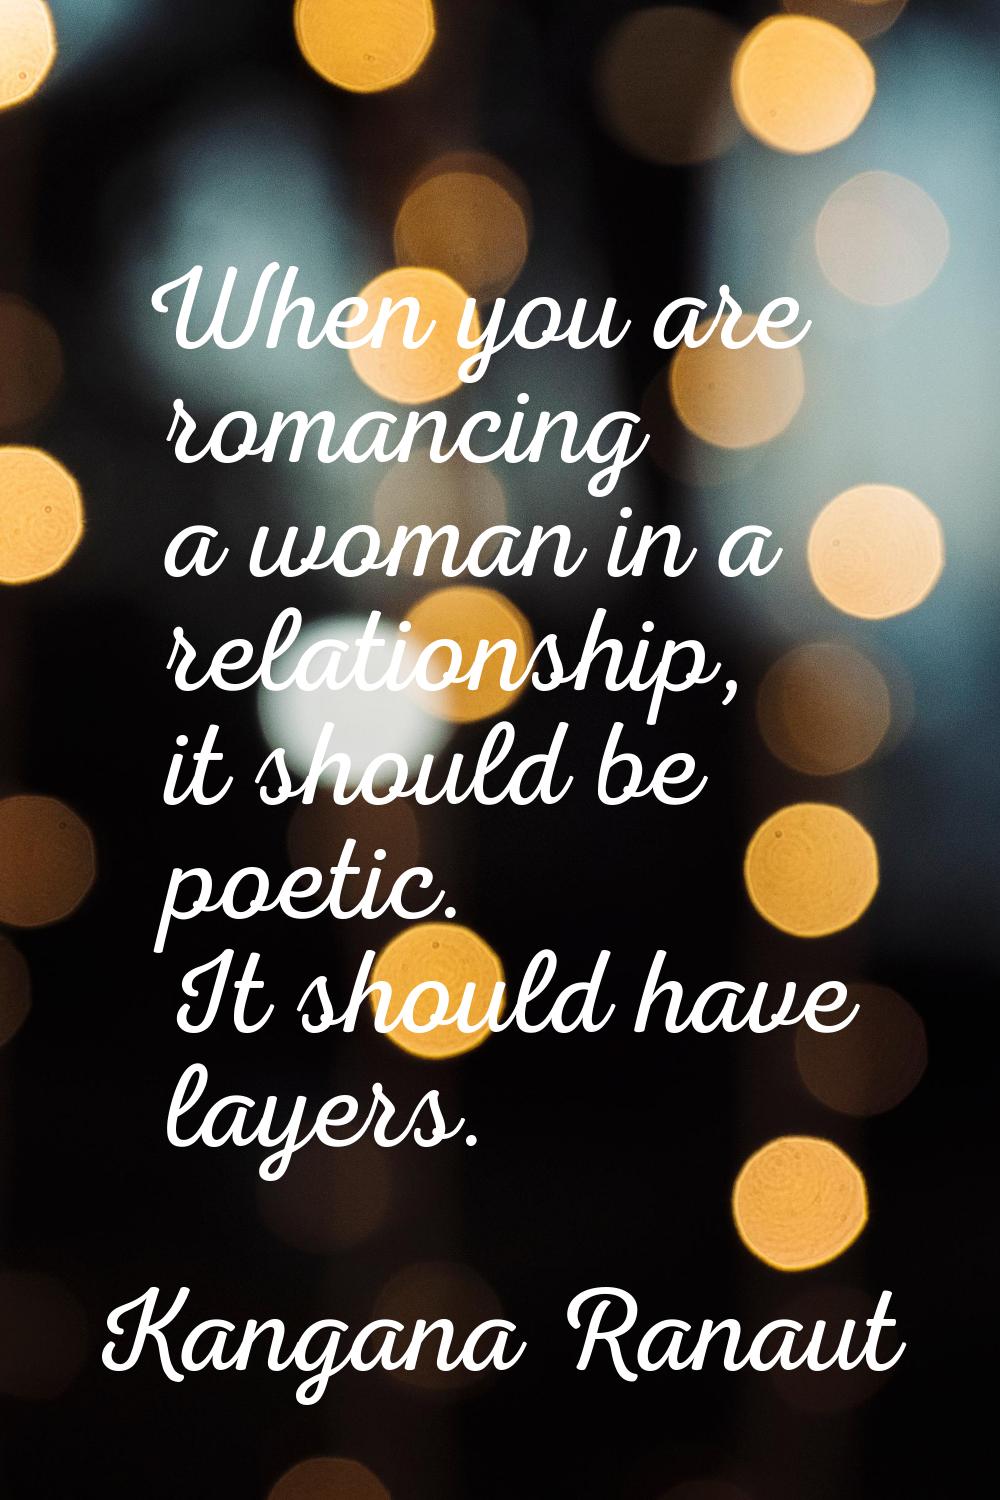 When you are romancing a woman in a relationship, it should be poetic. It should have layers.